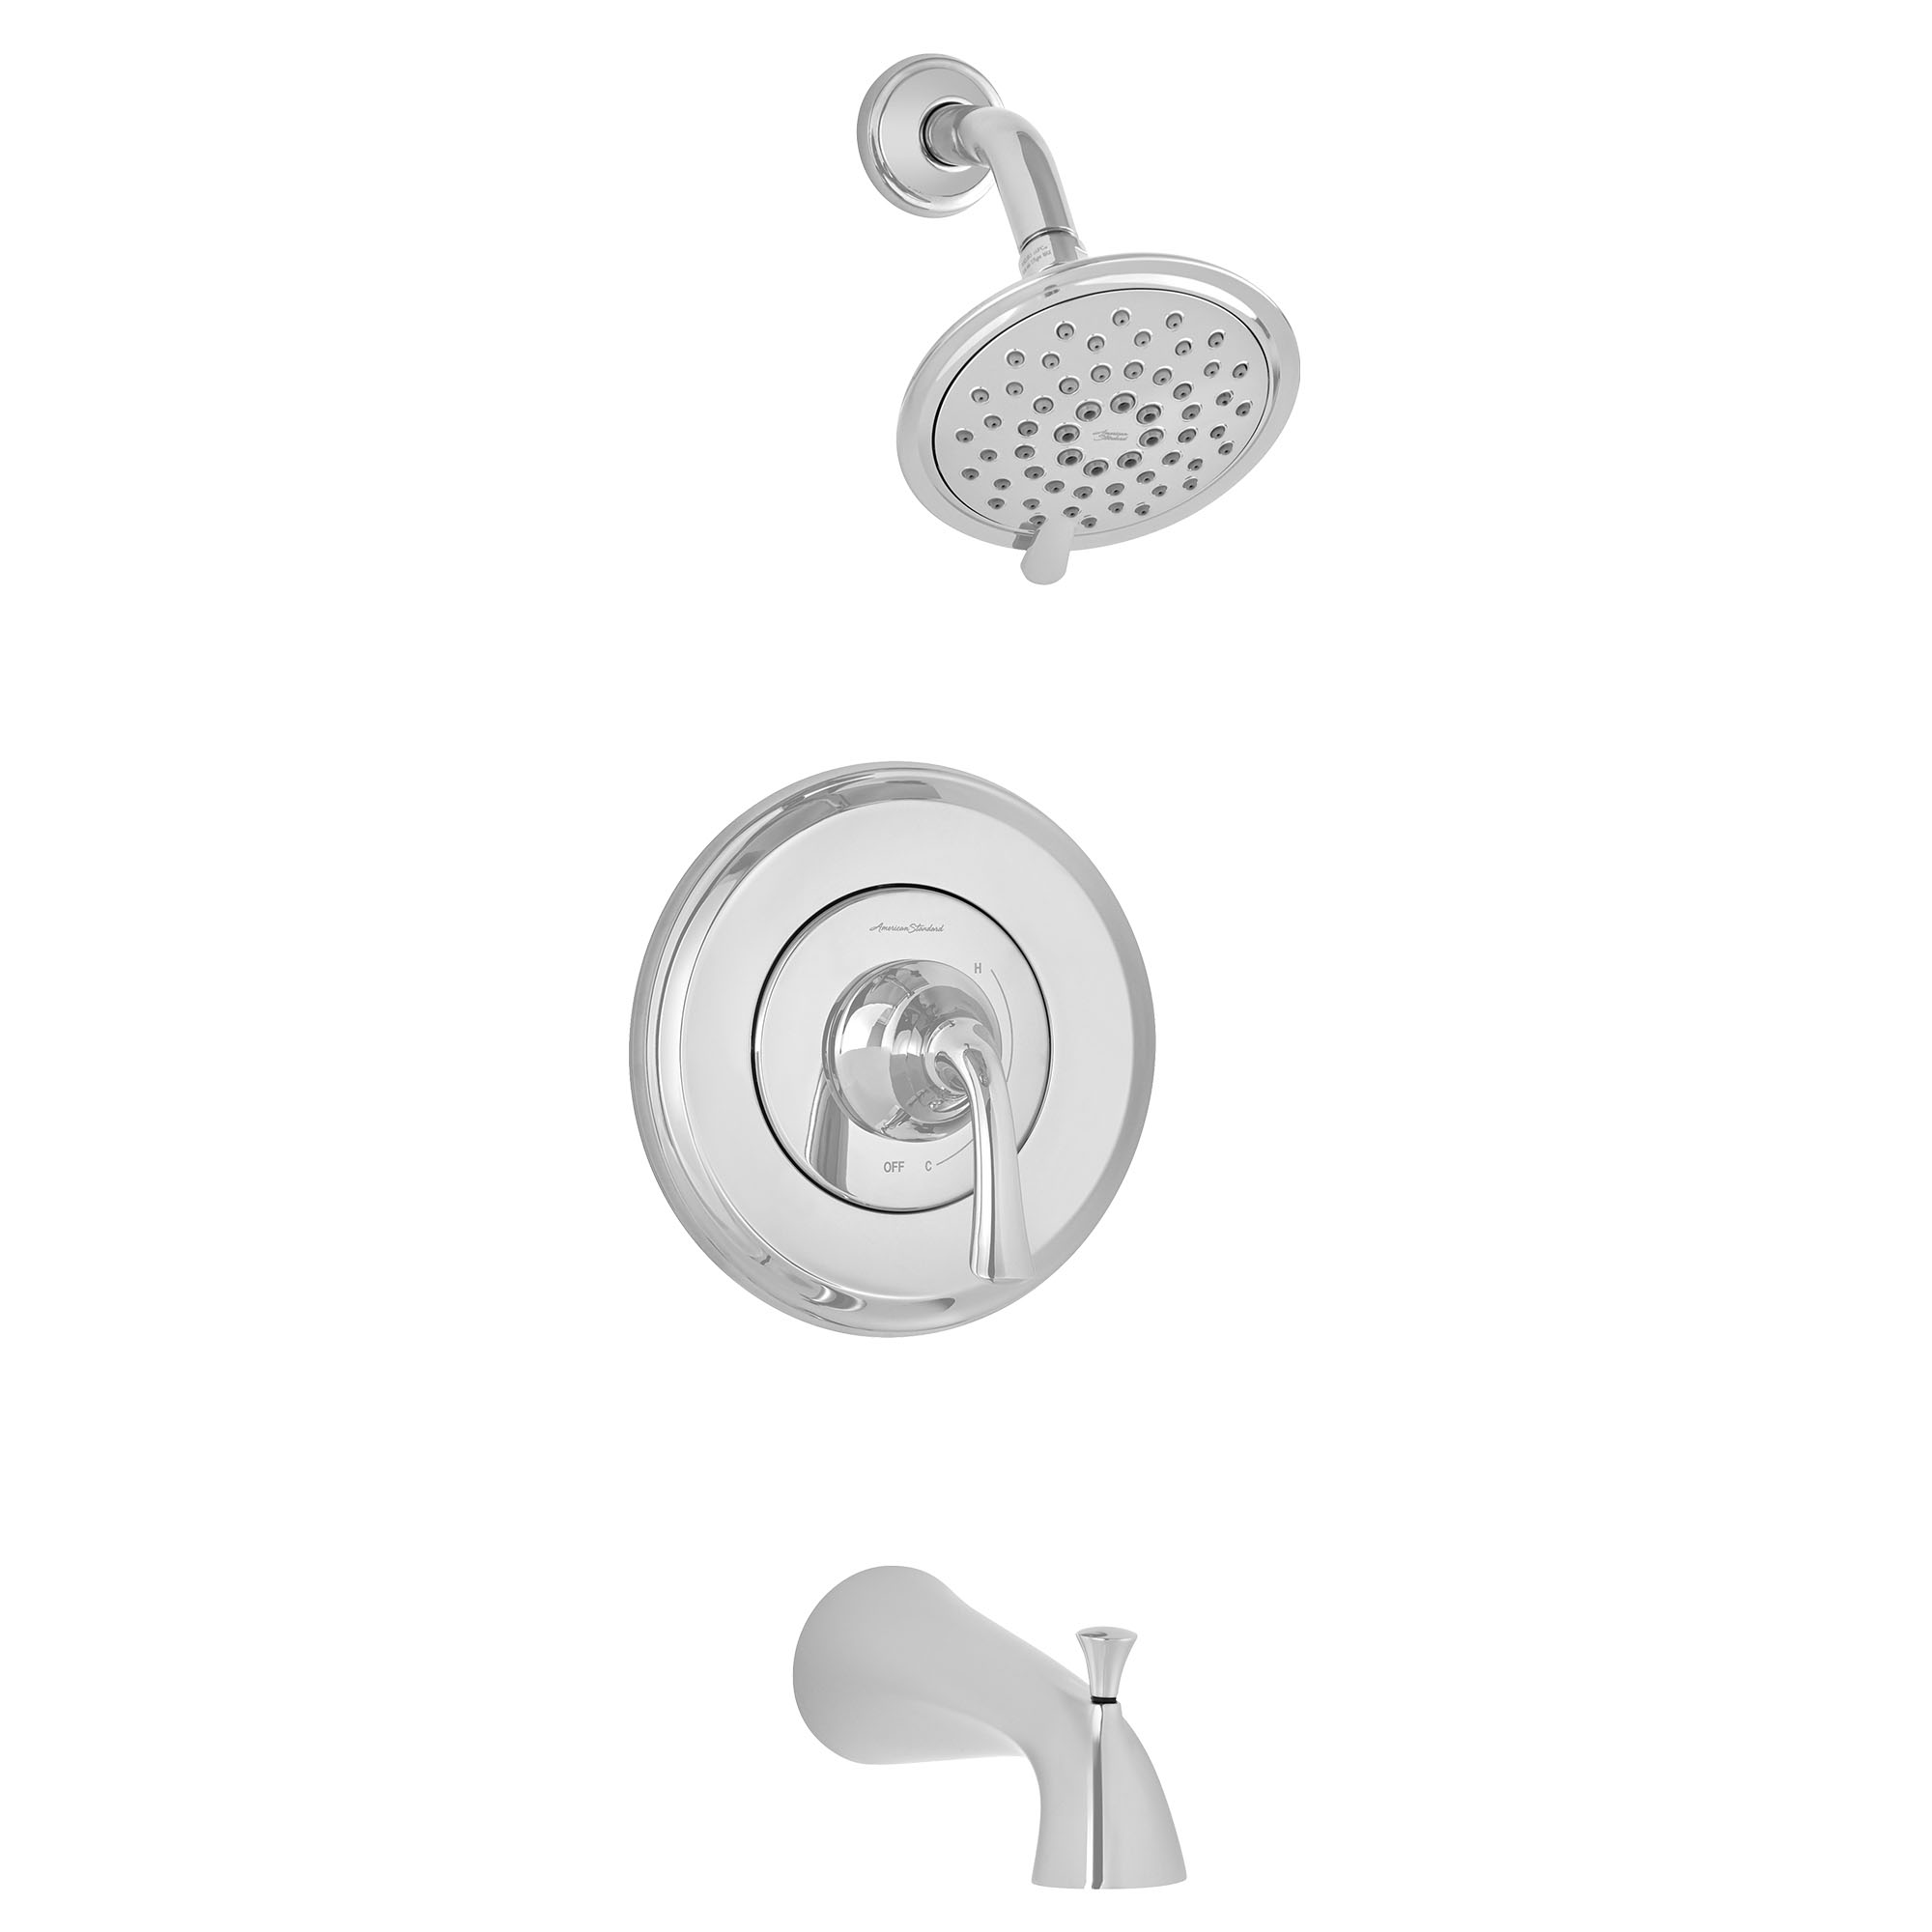 Patience® 2.5 gpm/9.5 L/min Tub and Shower Trim Kit With 3-Function Showerhead, Double Ceramic Pressure Balance Cartridge With Lever Handle